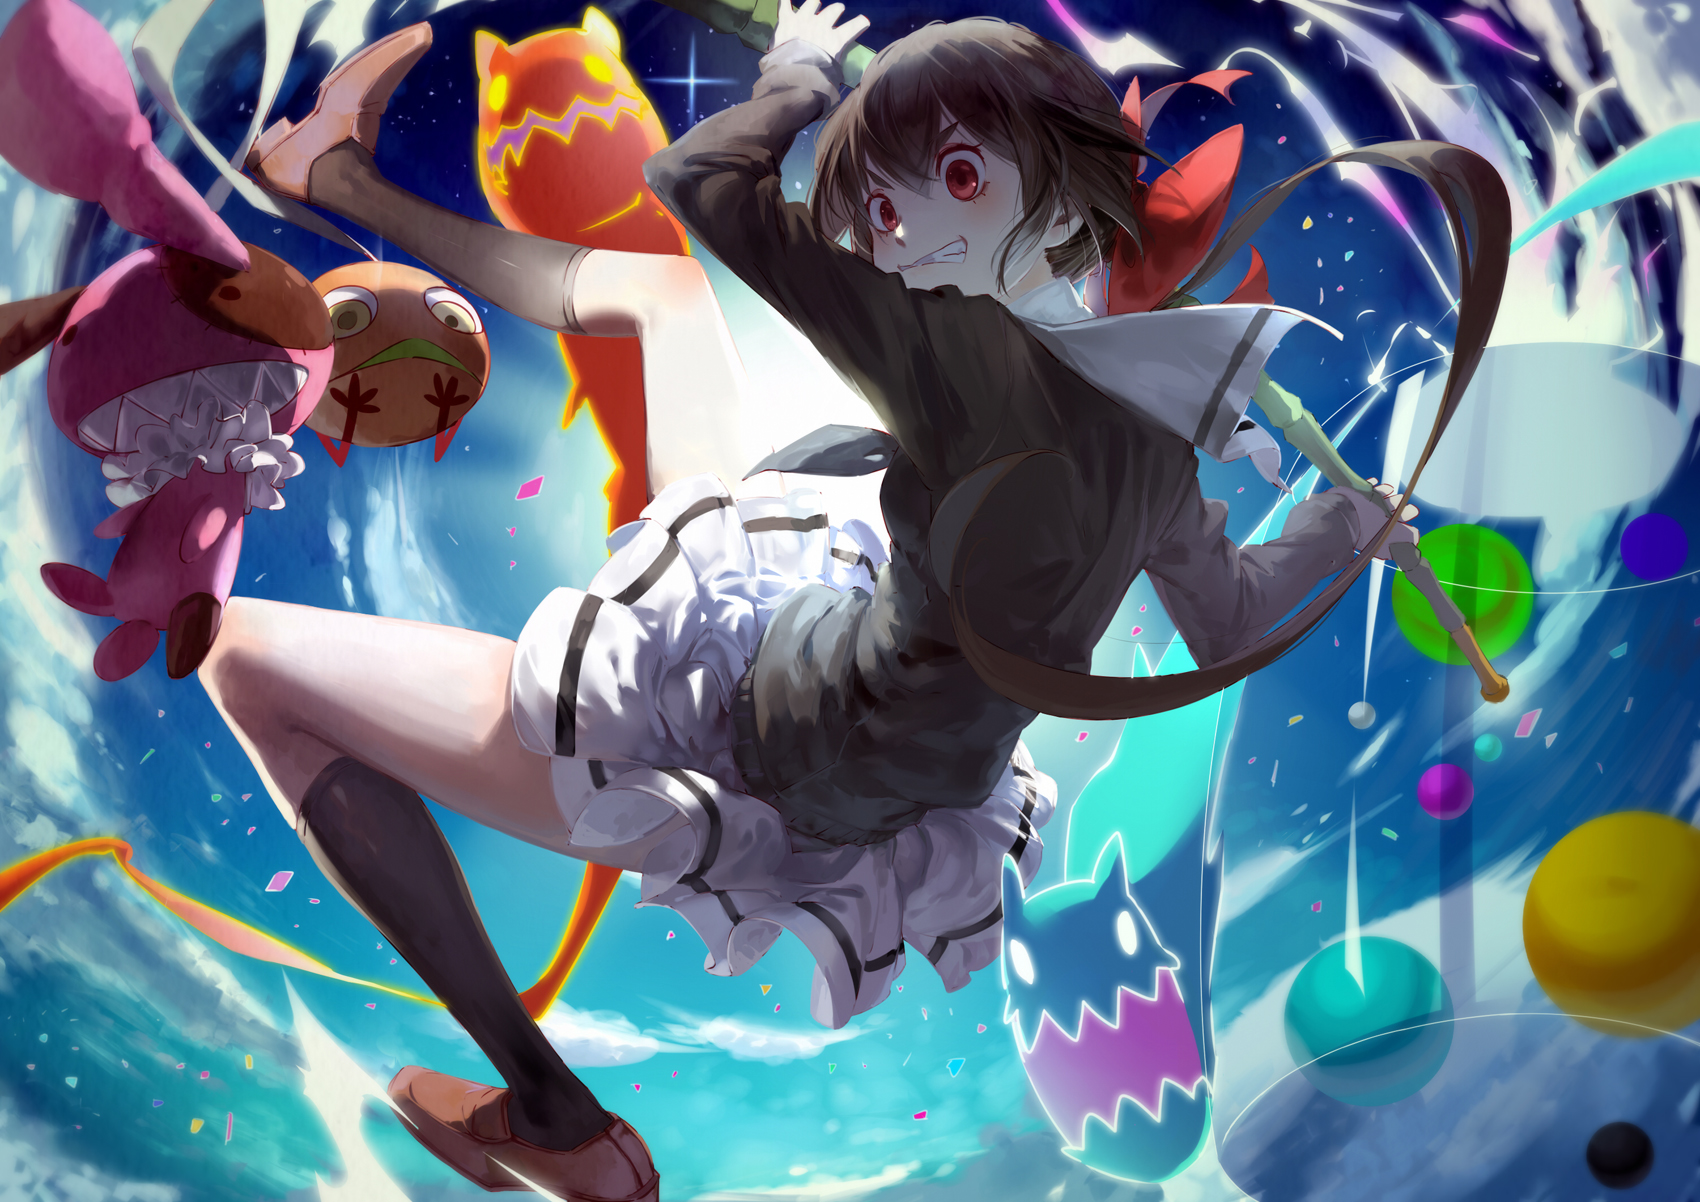 Kyousogiga Backgrounds, Compatible - PC, Mobile, Gadgets| 1700x1202 px